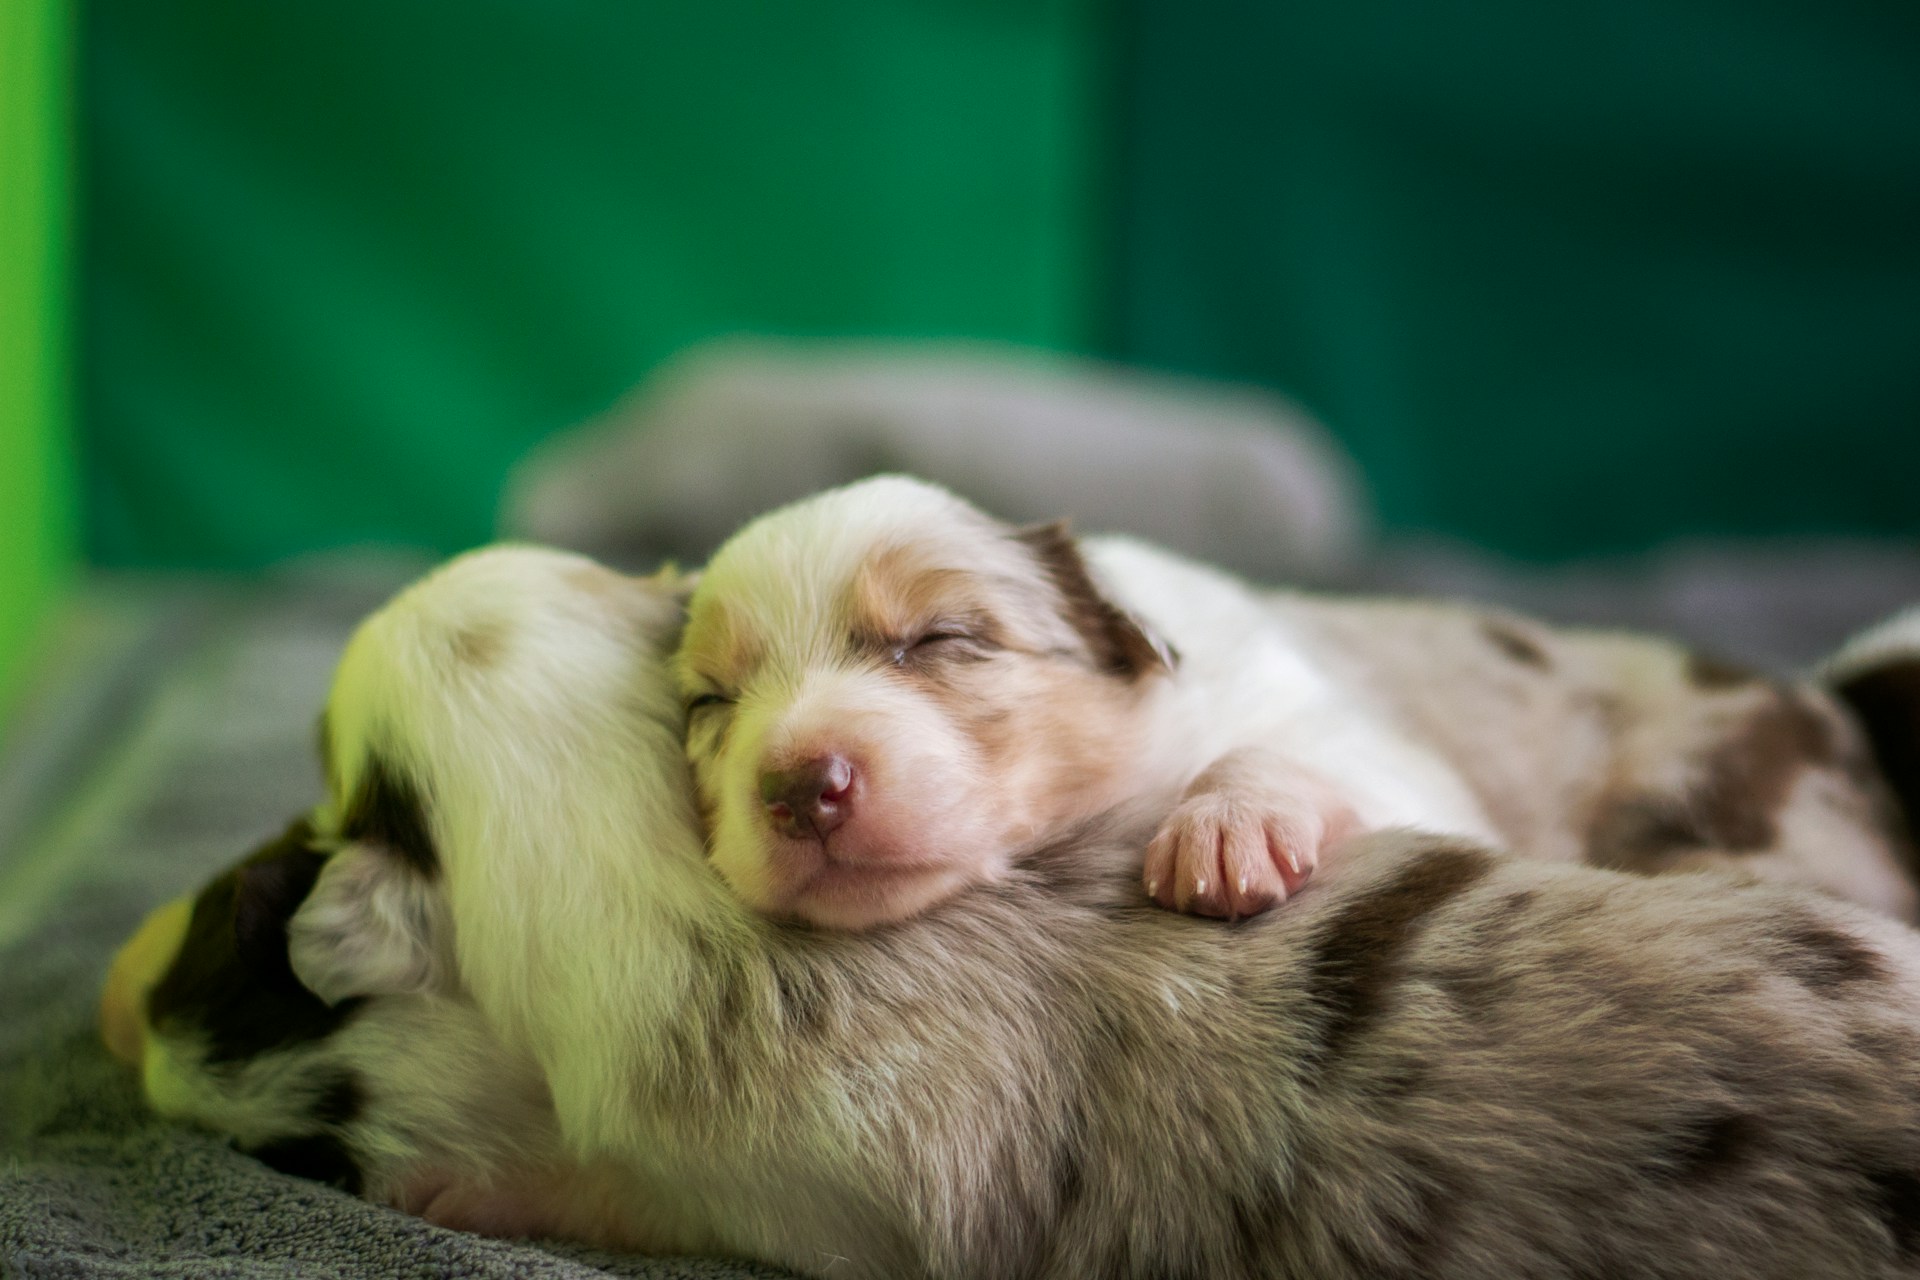 Puppy Breathing Fast While Sleeping: Health Guide